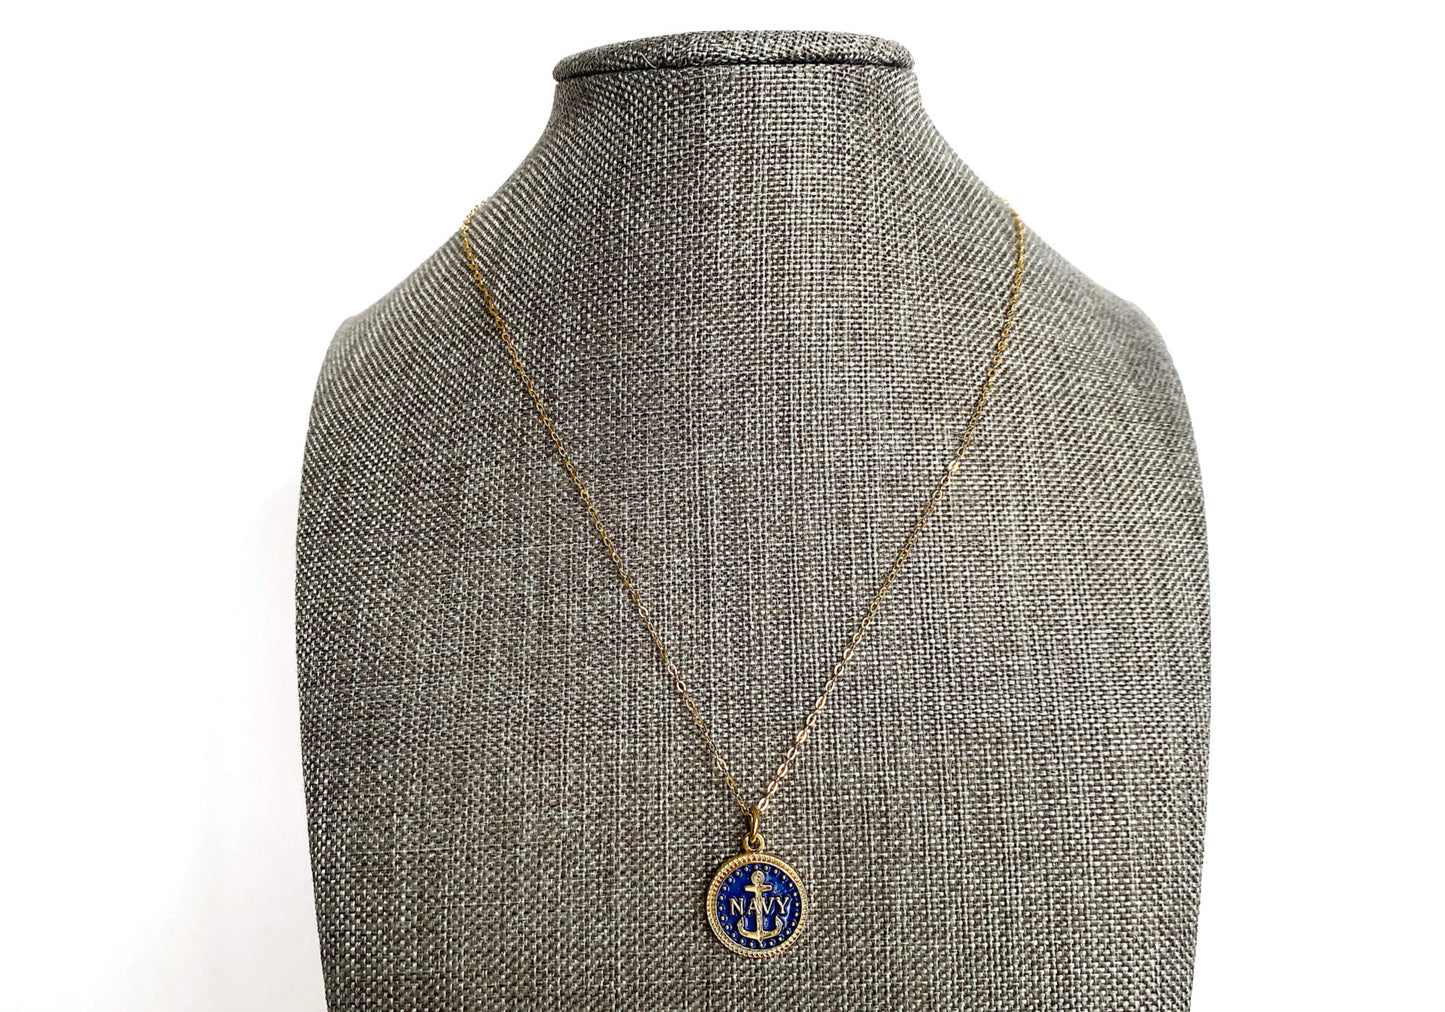 Navy Charm Necklace